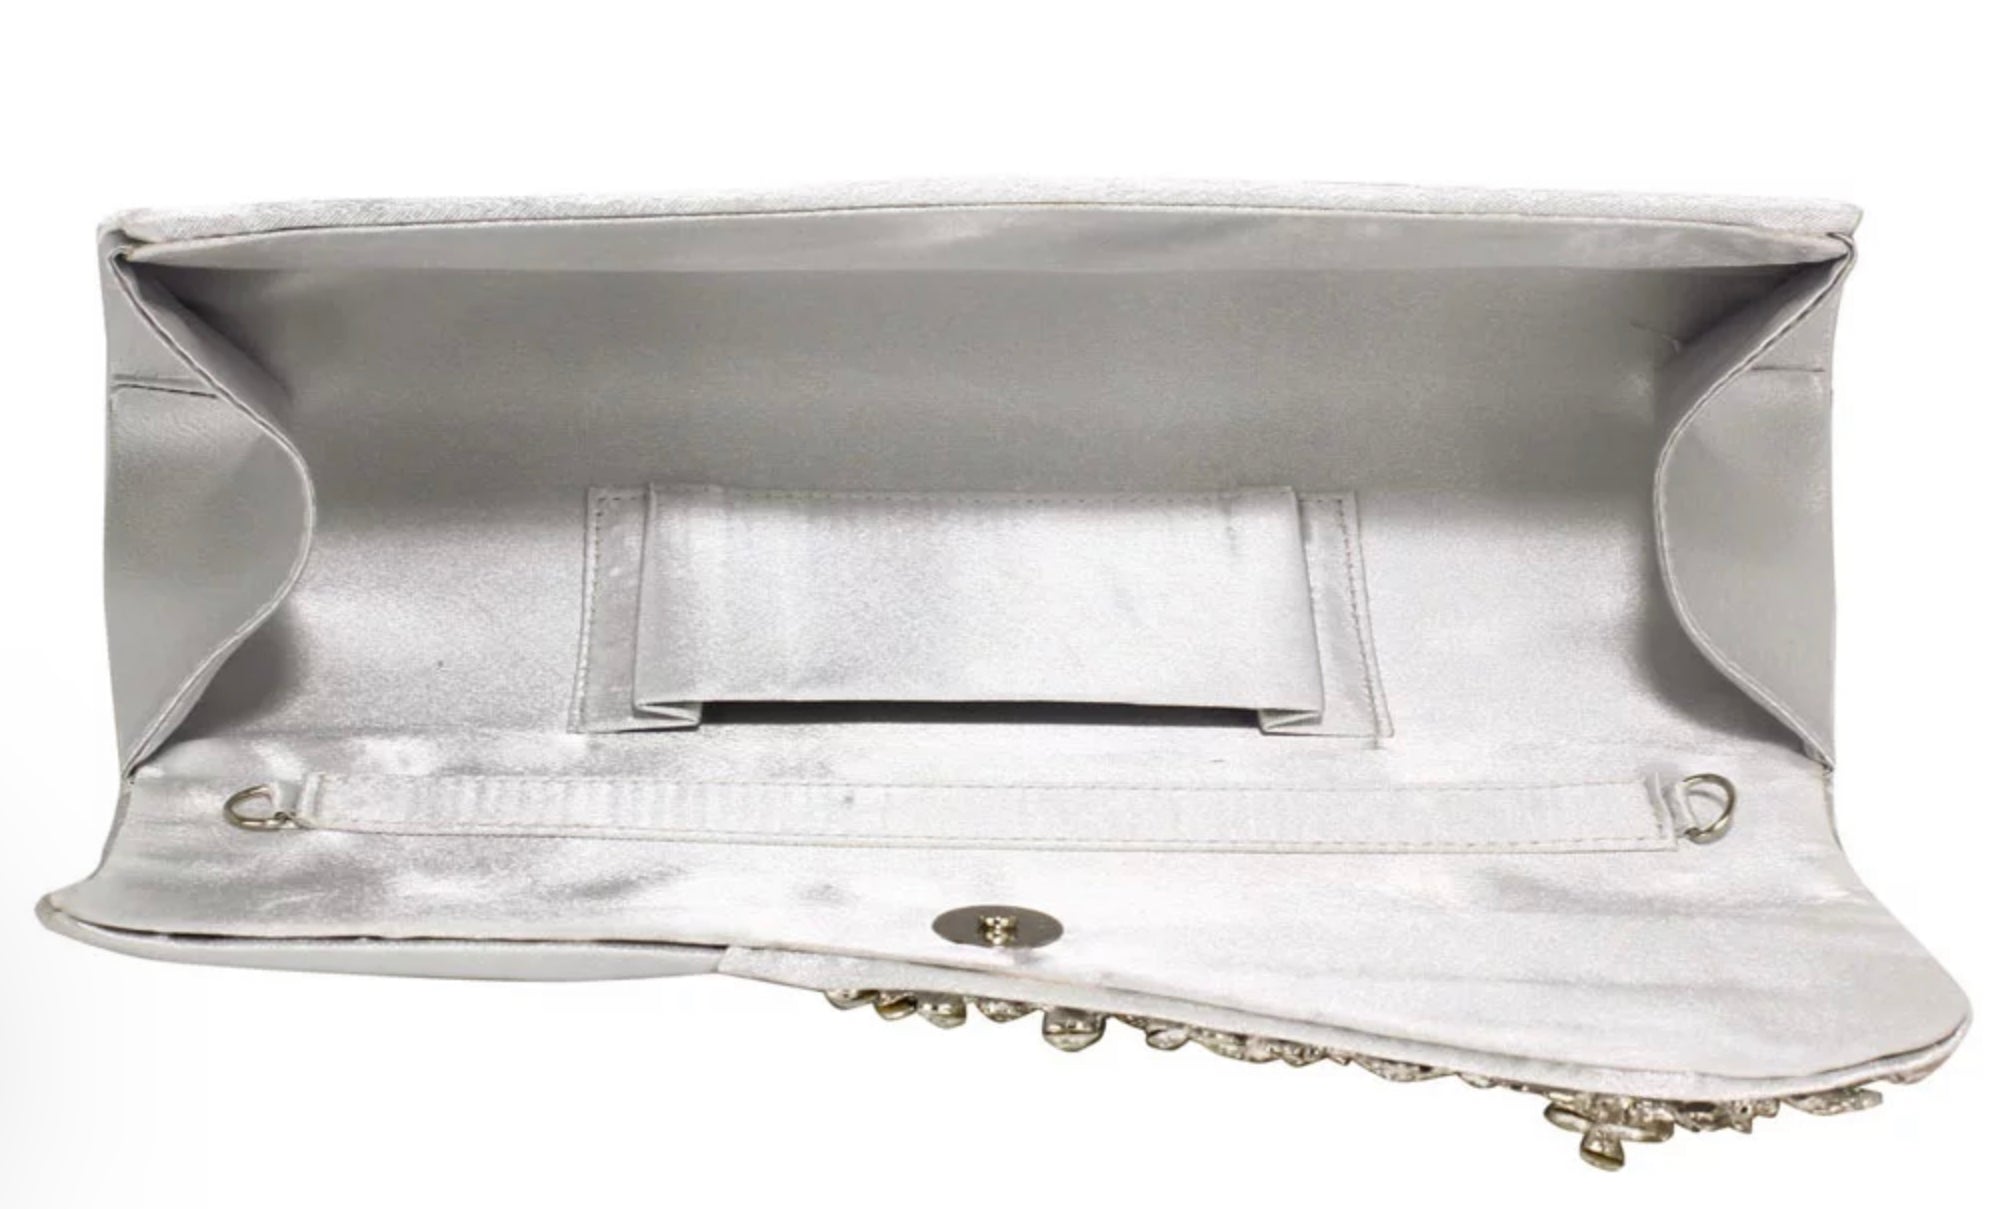 Silver Ruched Satin Clutch With Crystal diamante brooch detail